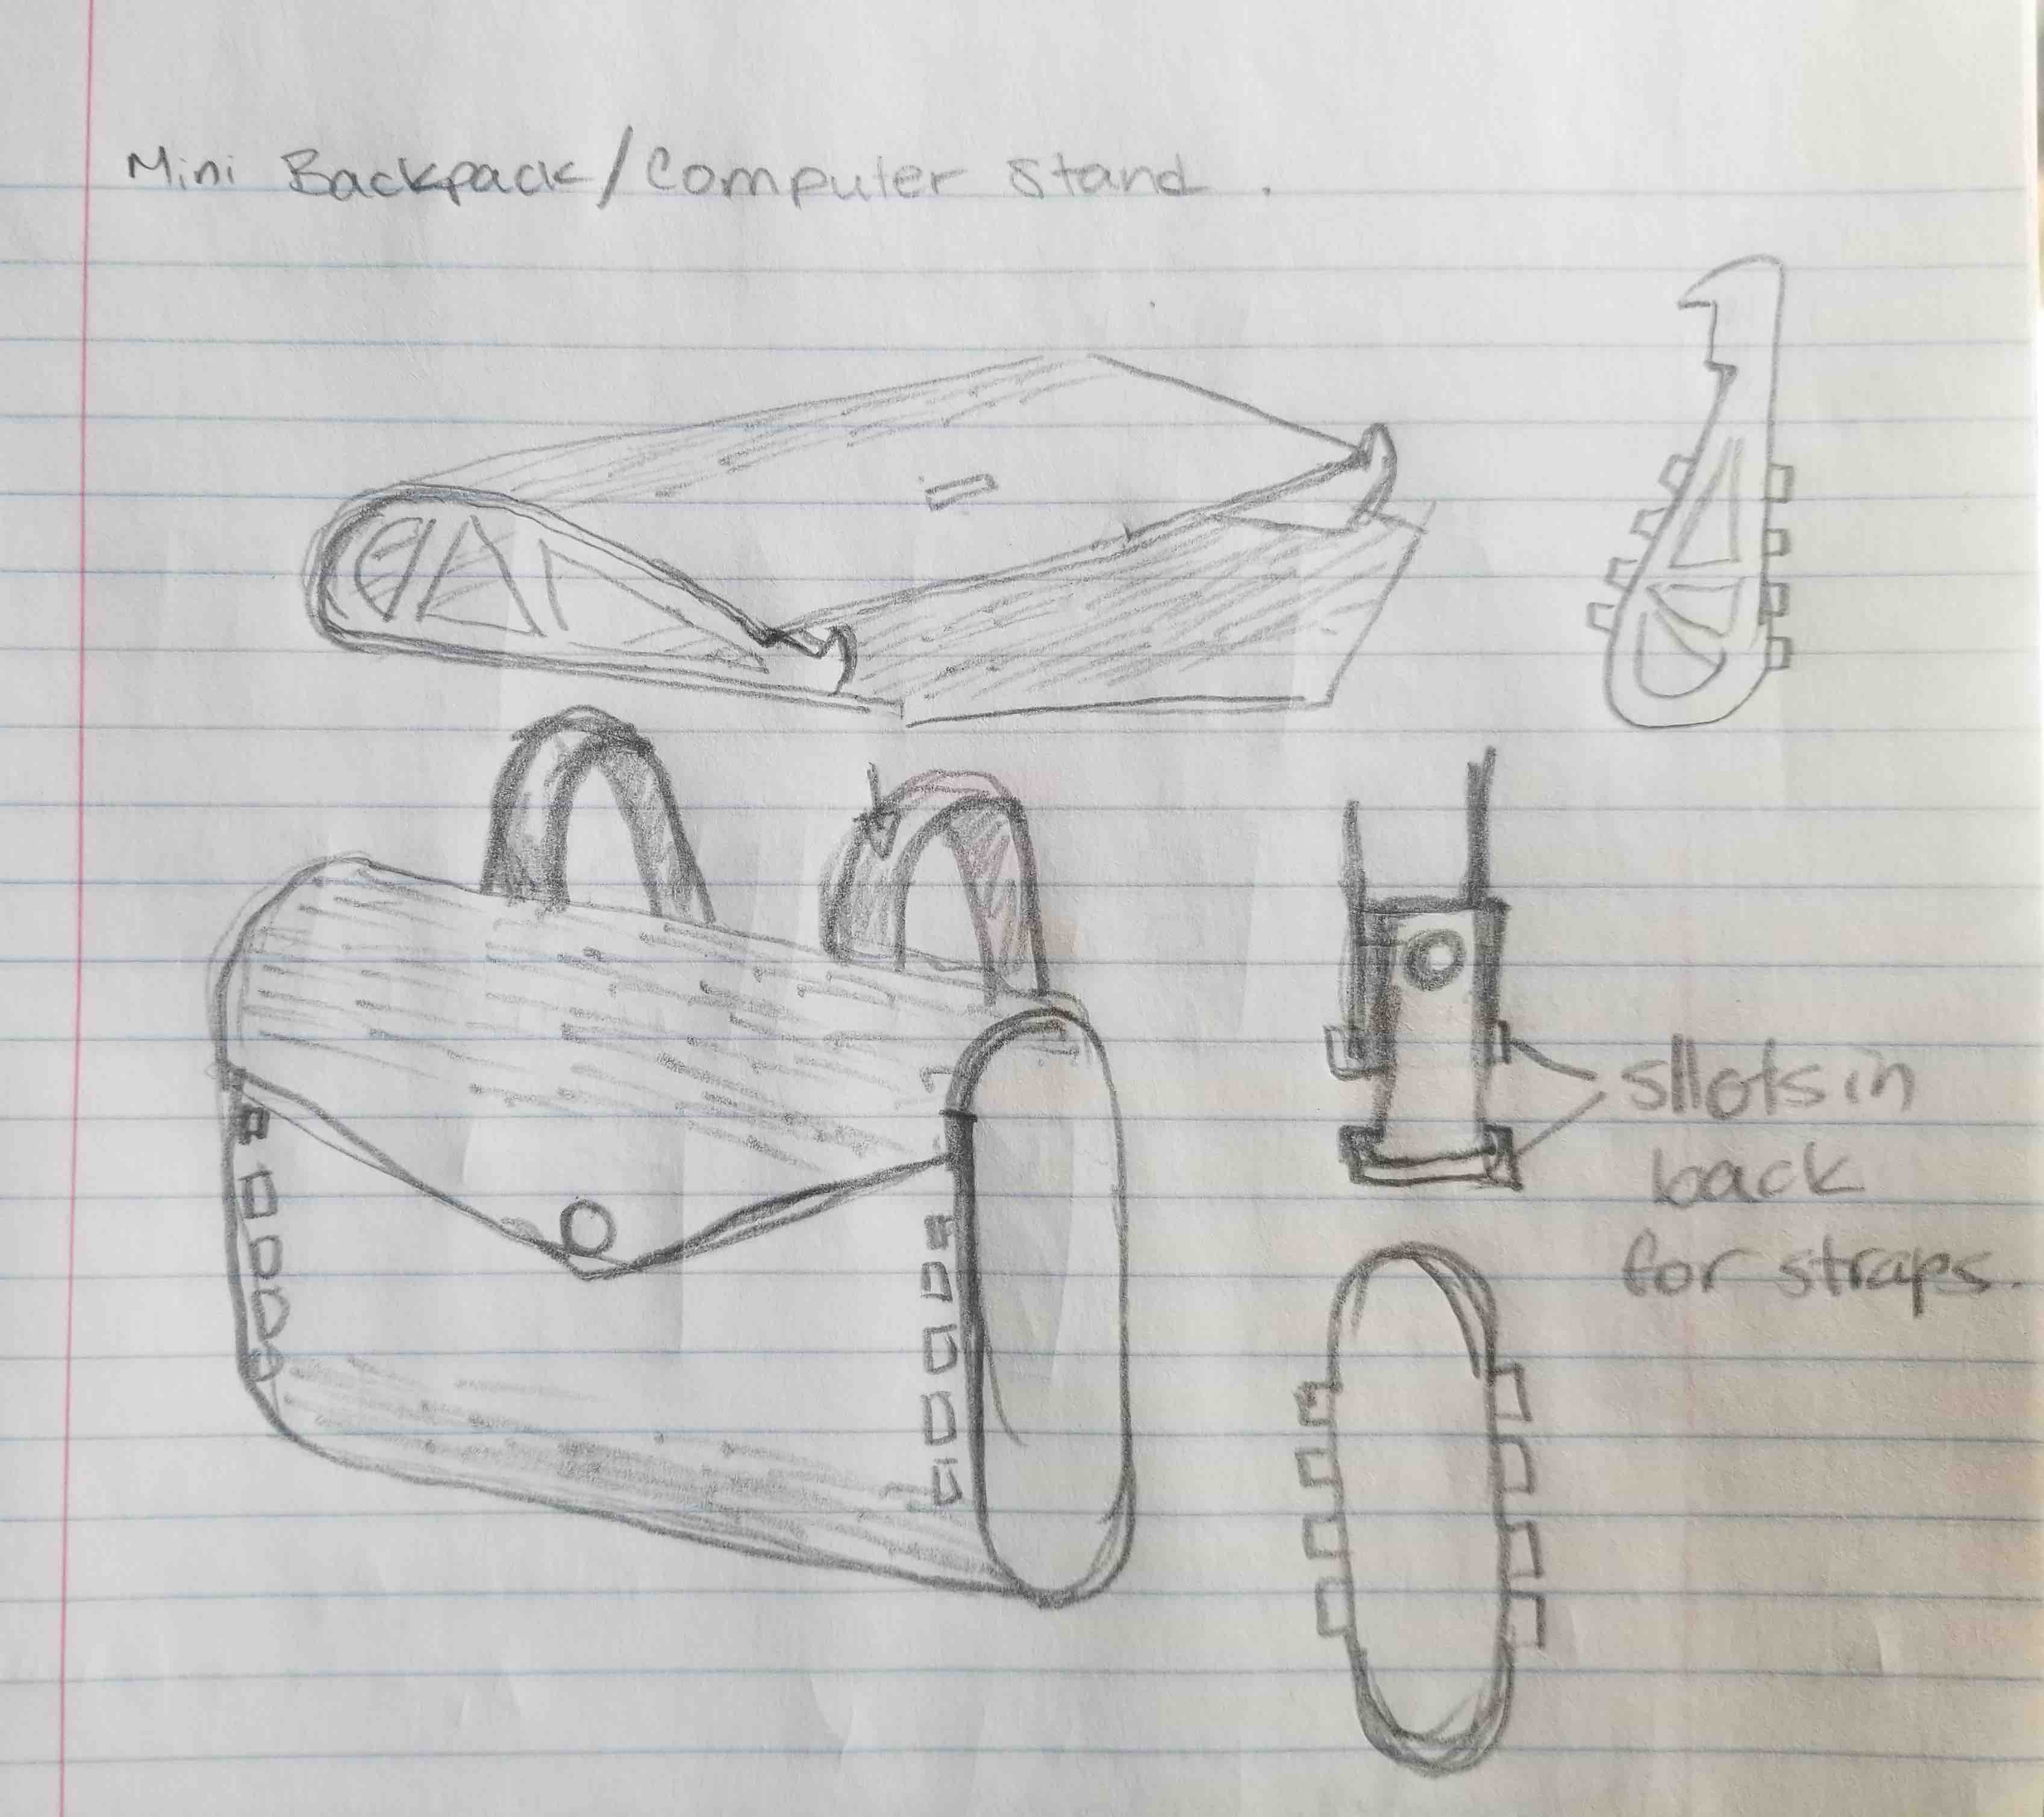 Backpack/Computer Stand Concept Sketch